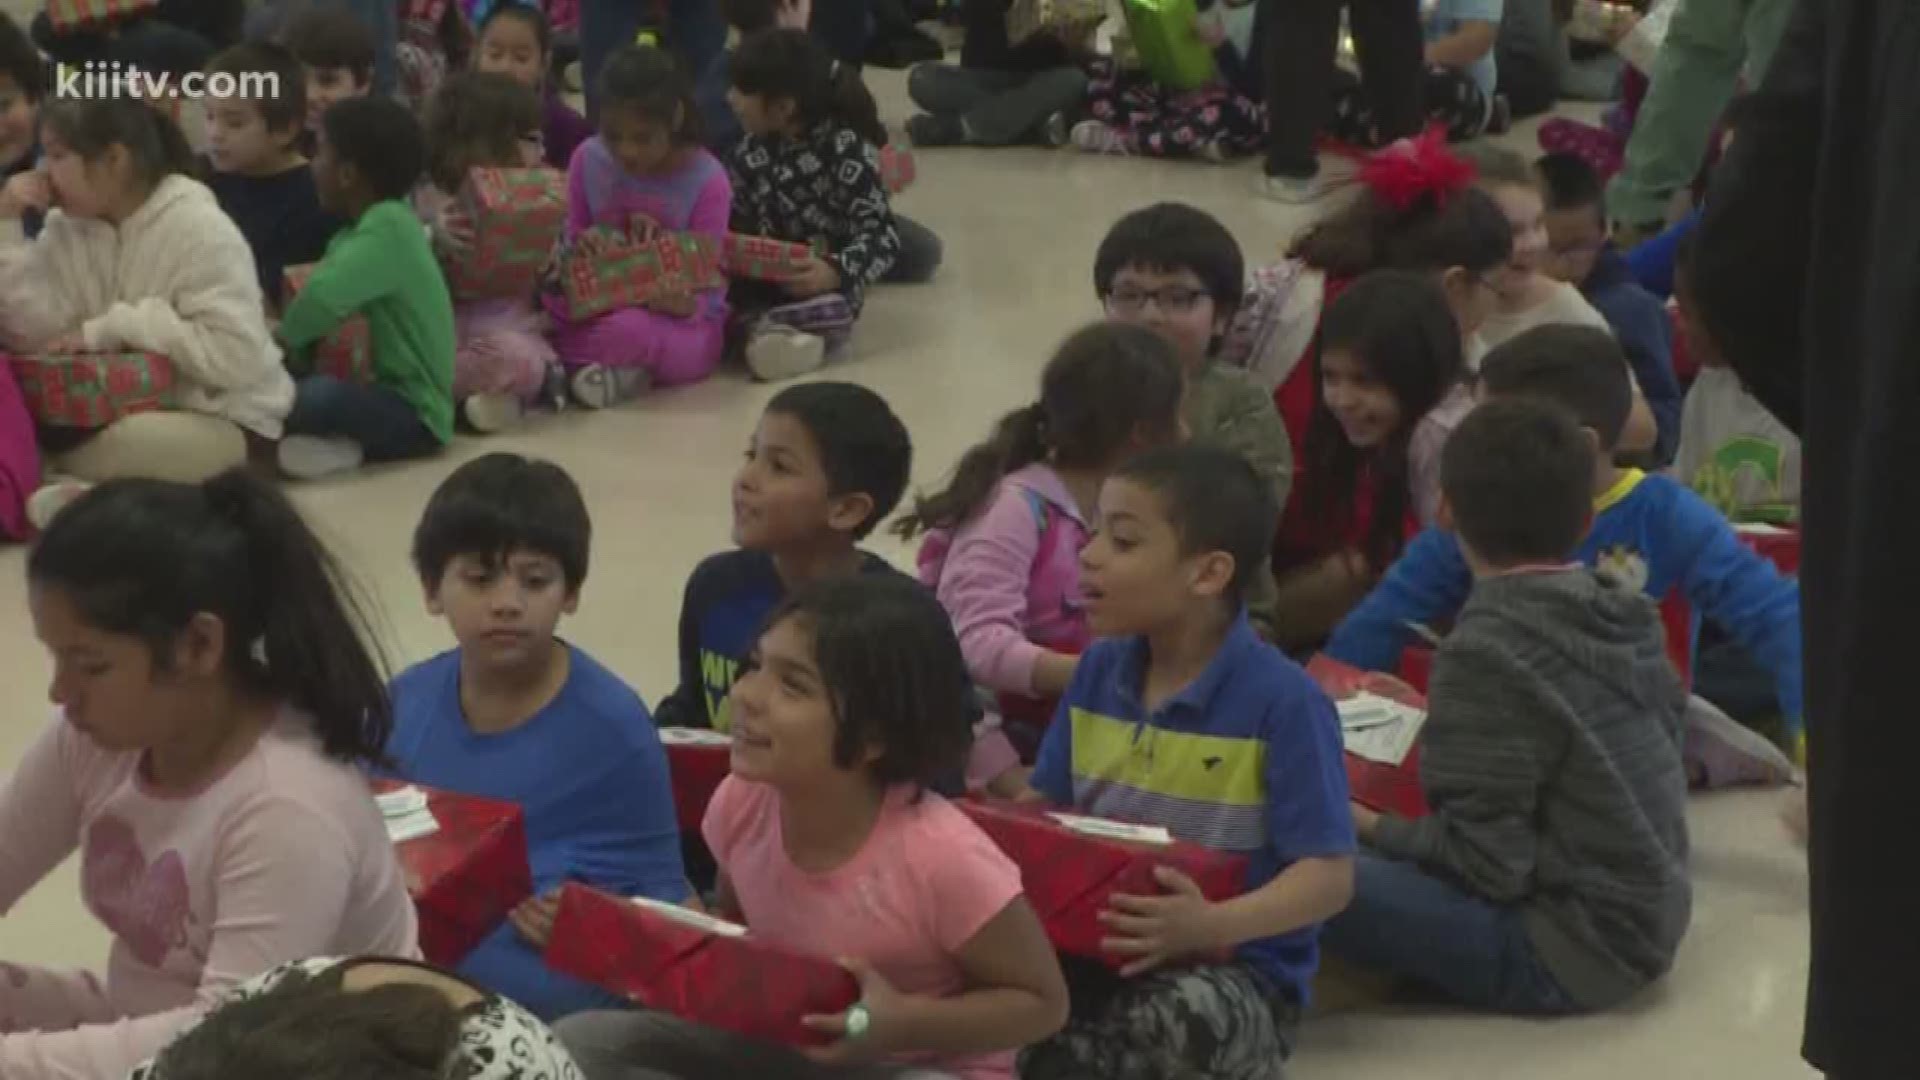 Friday was all about community helping community at Gibson Elementary School as students received a big surprise just before their Christmas break.